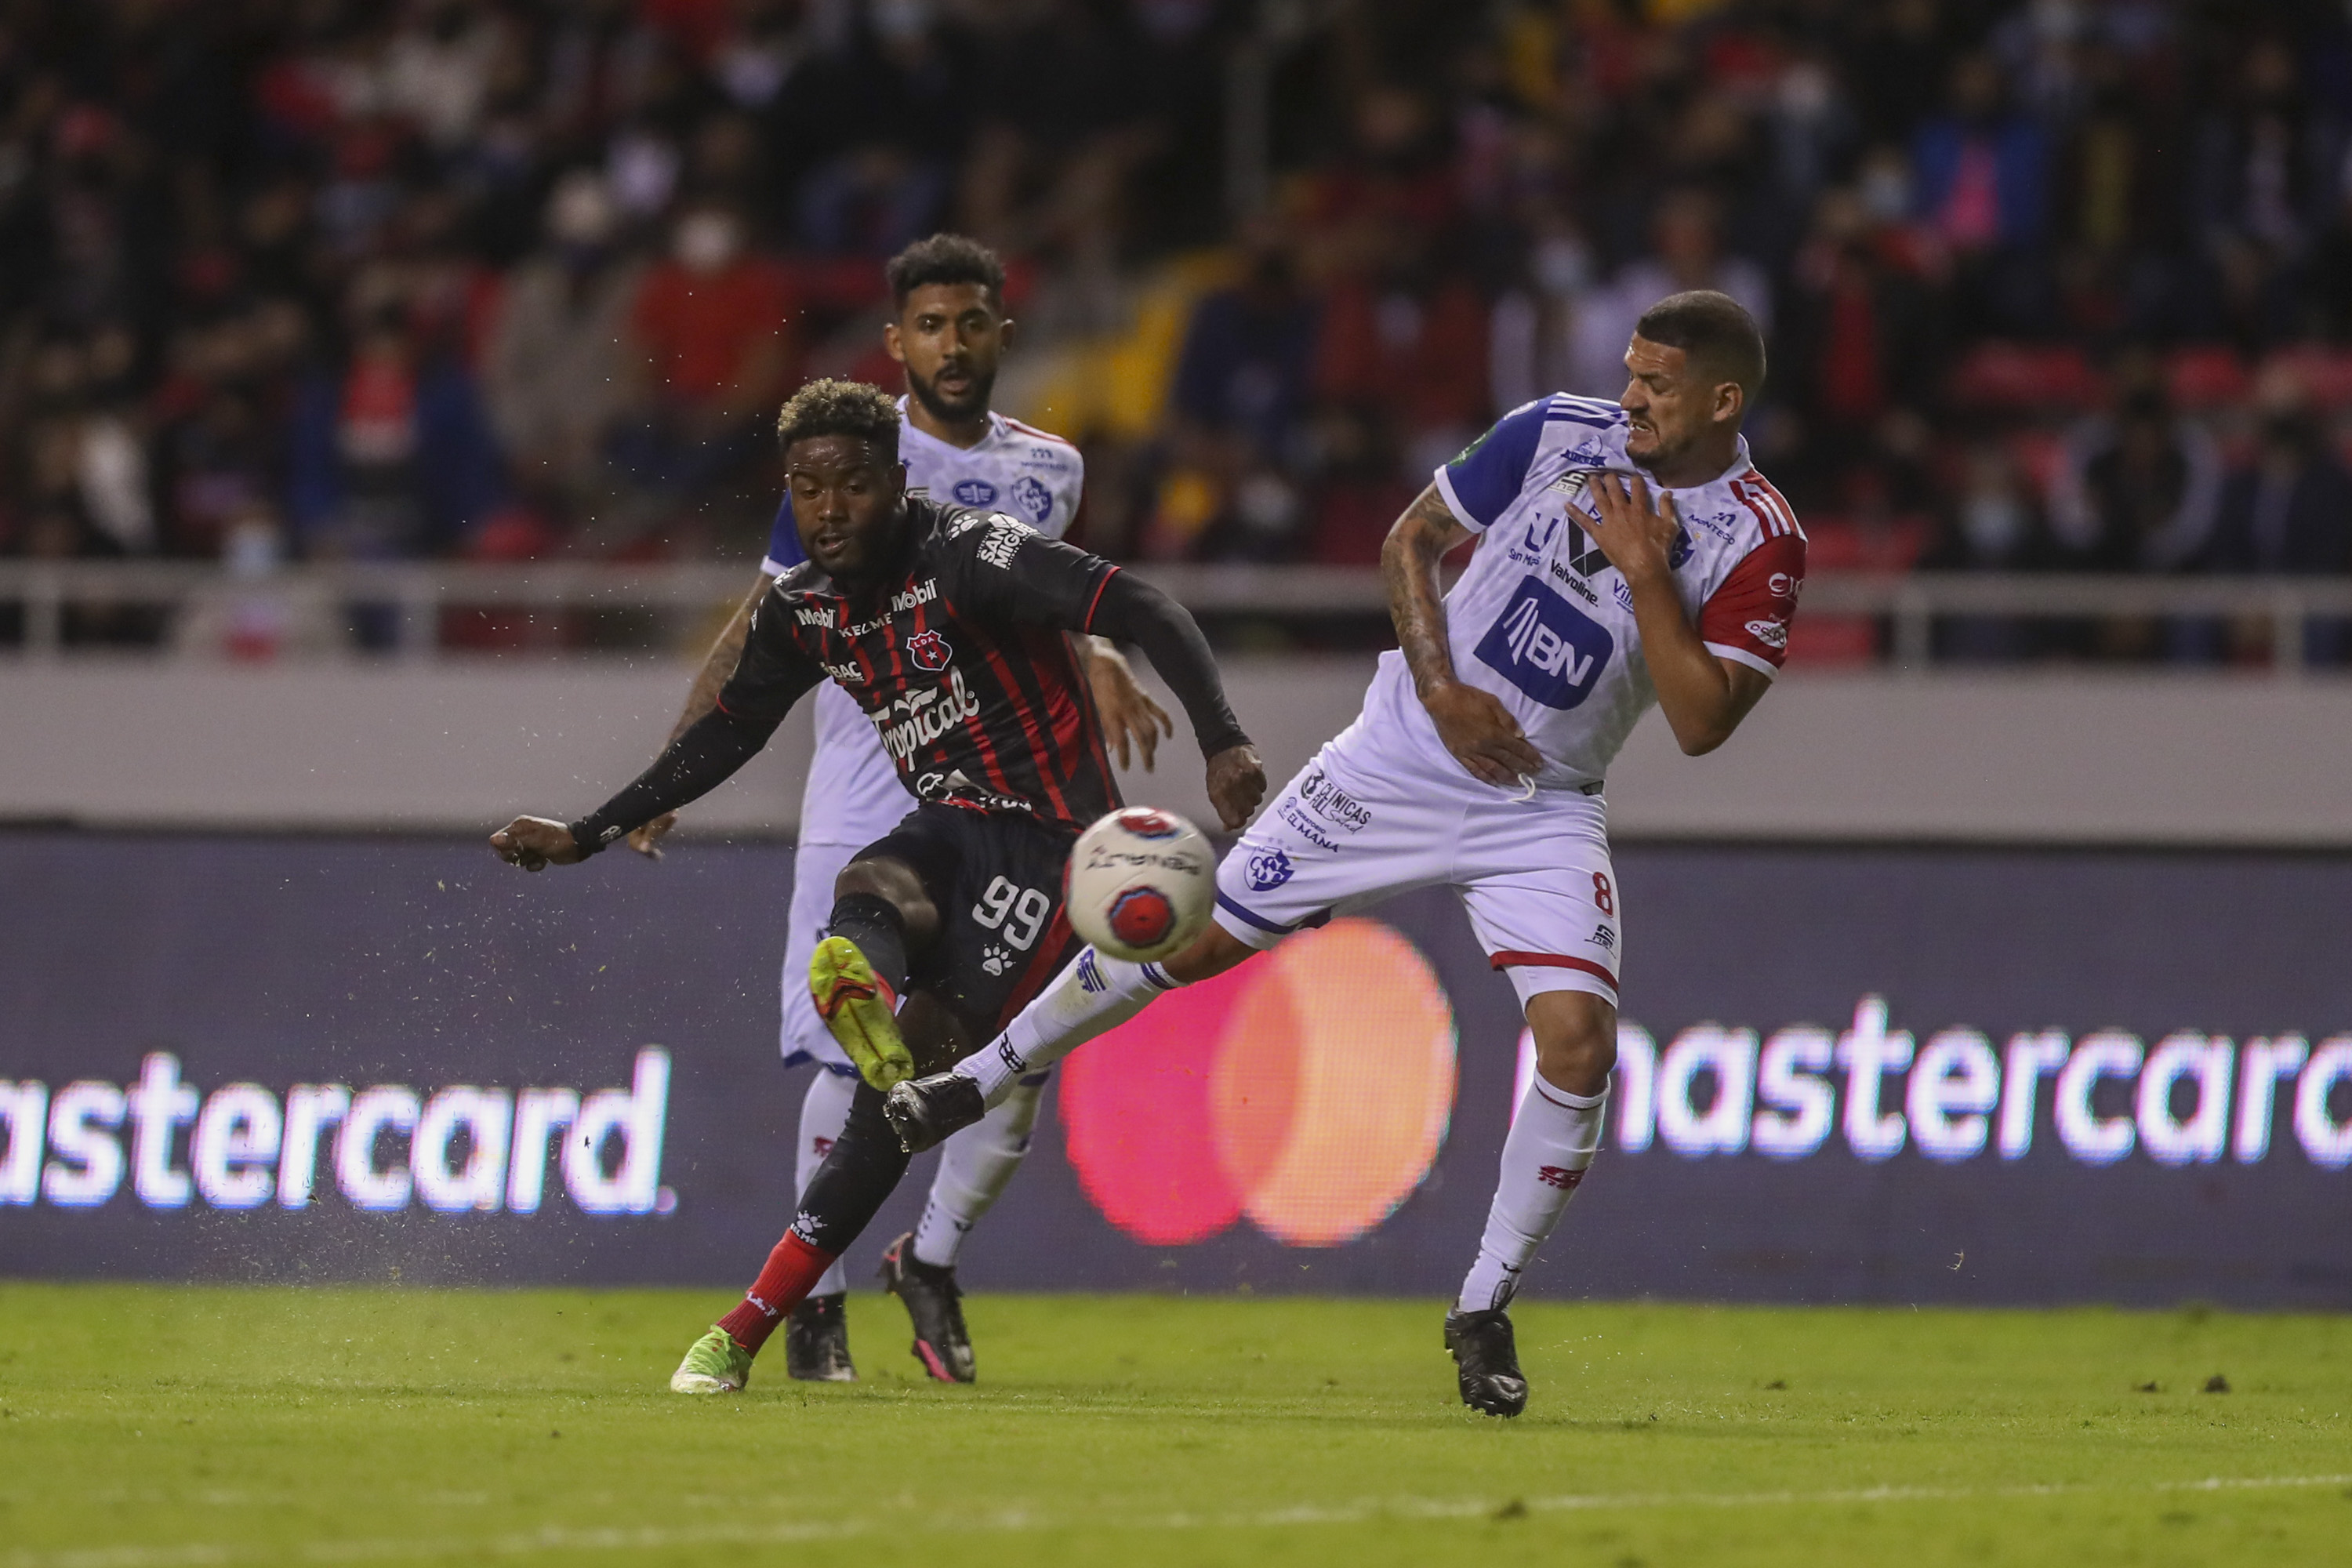 Alajuelense's big second half puts Cartagines on the ropes